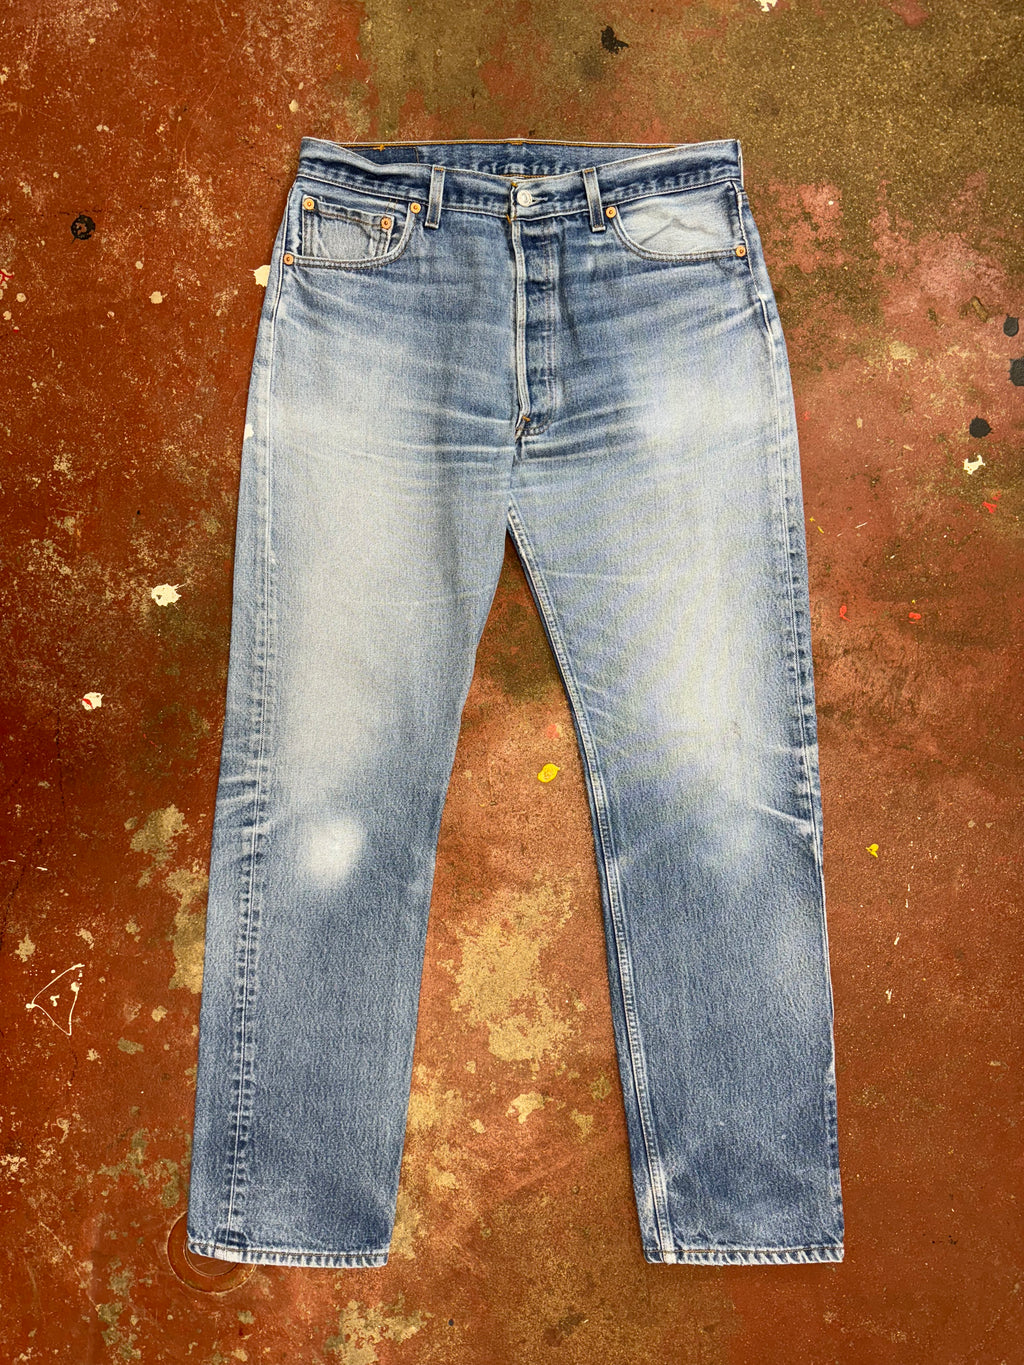 Vintage Levi's 501 Super Wash Denim Jeans with Small Paint (JYJ0424-192)